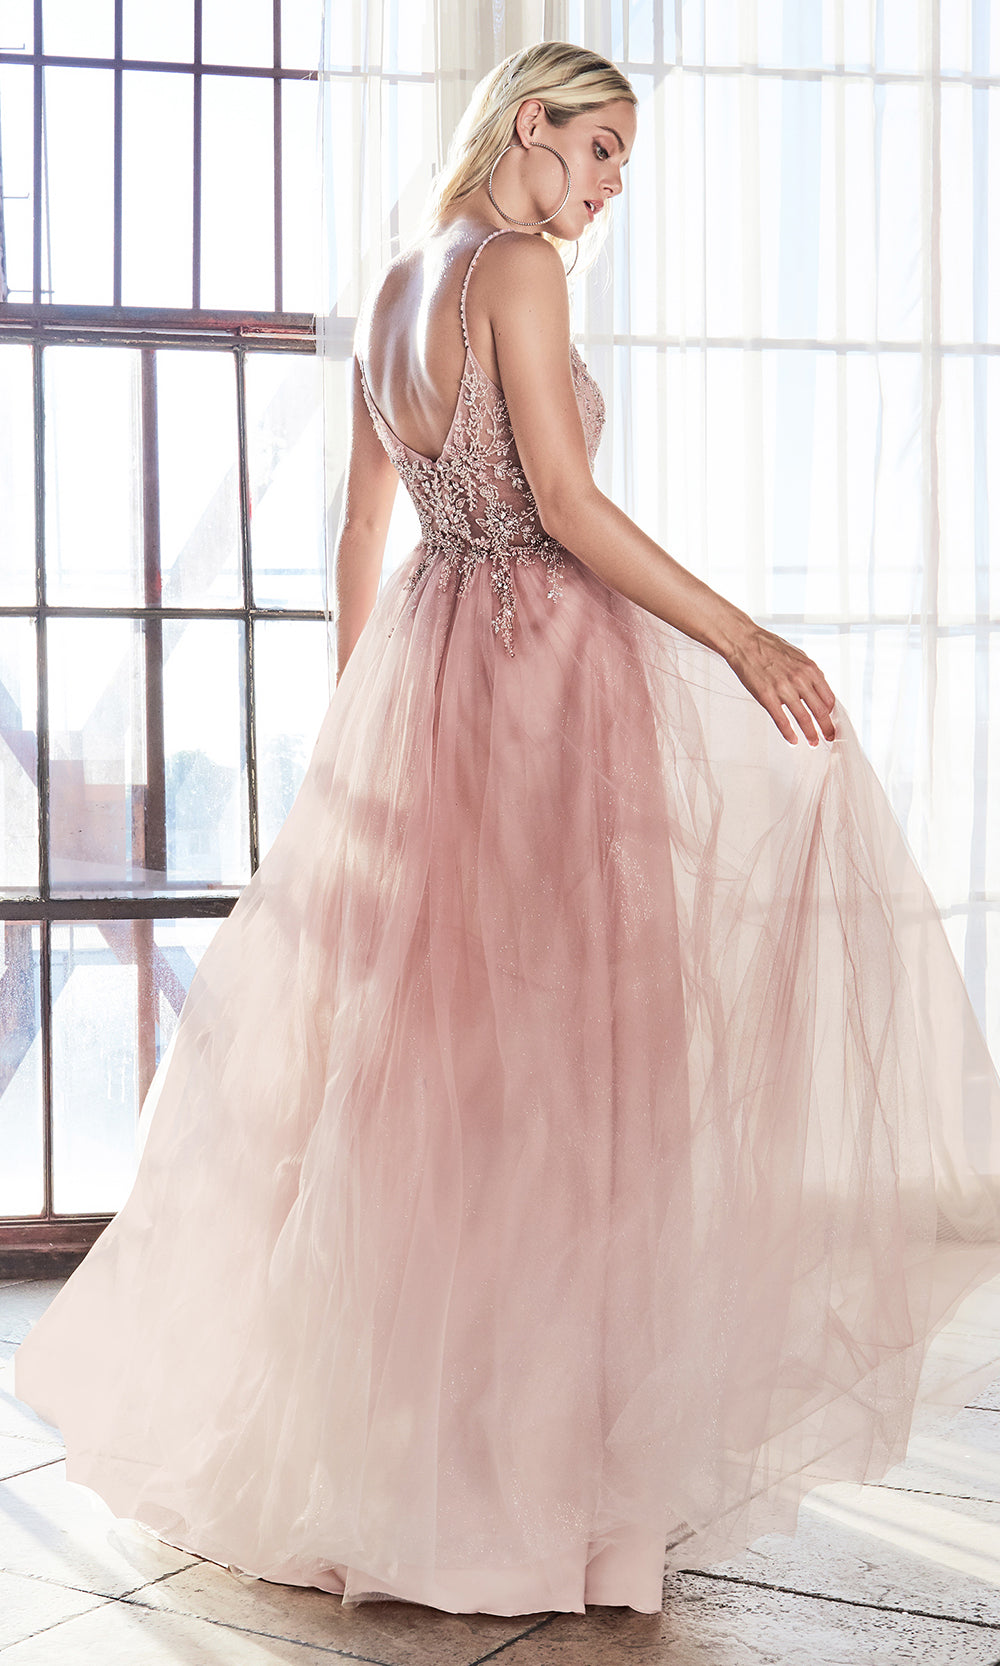 Cinderella Divine AM321 long blush pink flowy dress w/lace & strap. Light pink full length flowy evening dress is perfect for black tie event, prom, indowestern gown, wedding reception/engagement dress, formal wedding guest dress-B.Plus sizes avail.jpg